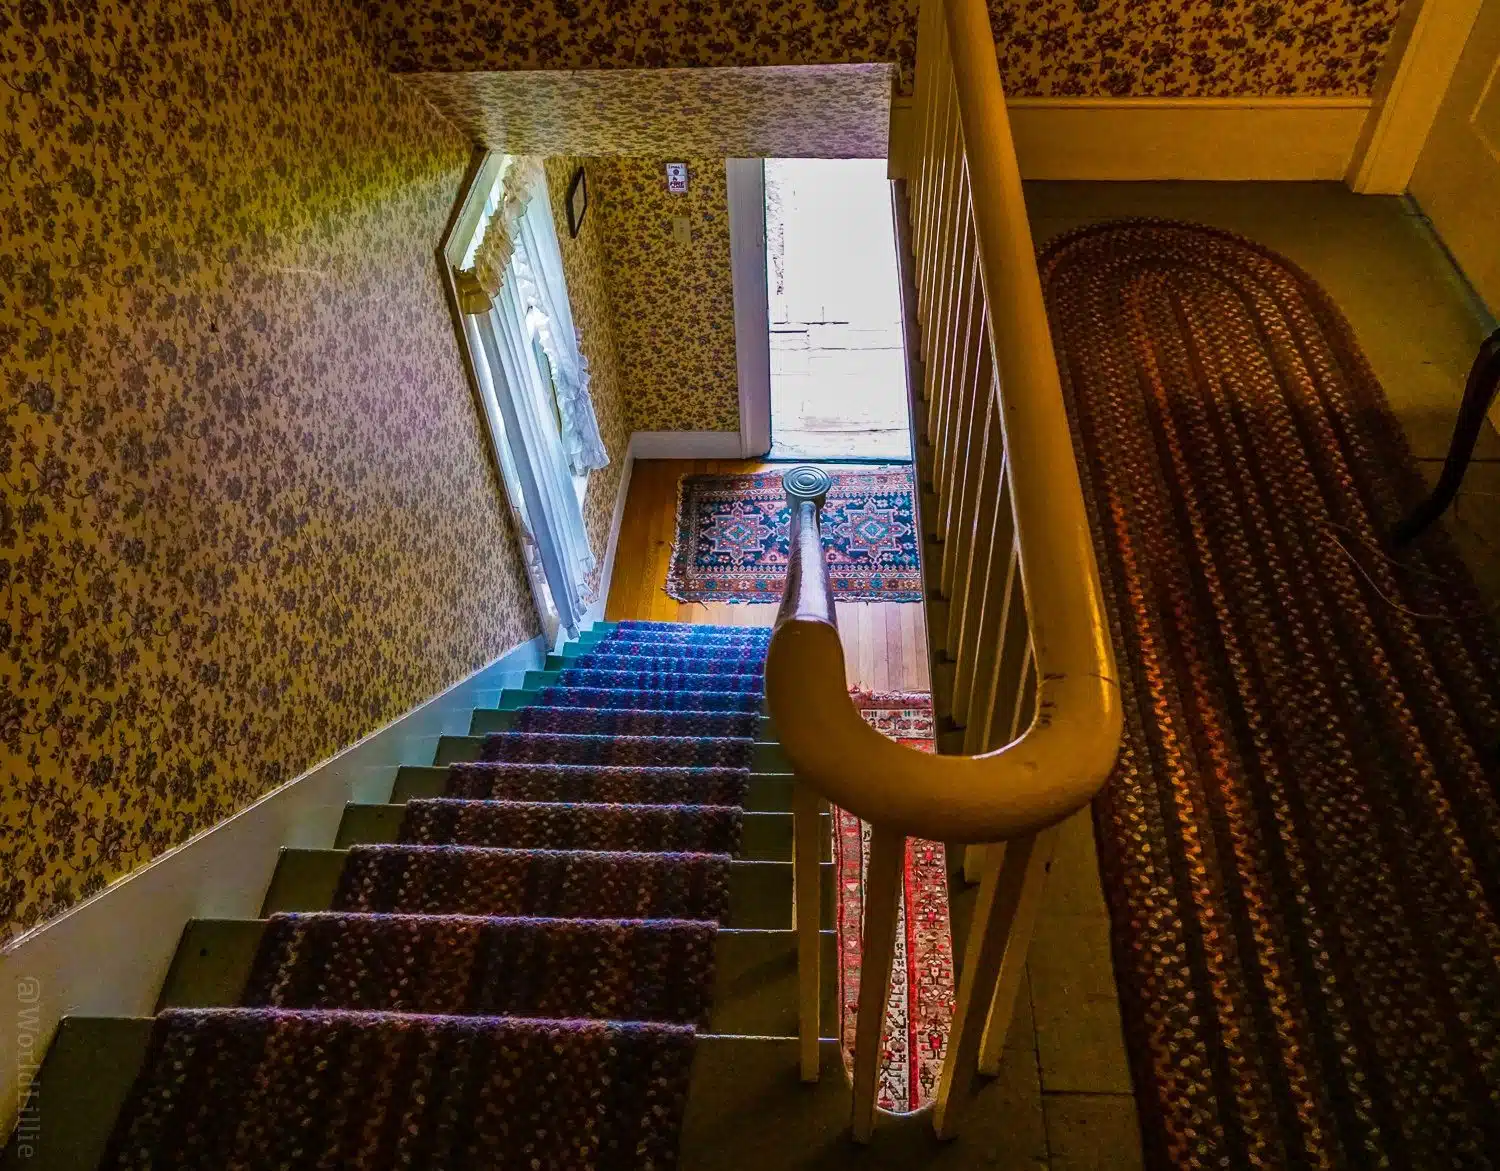 Staircases and historic hotel carpets and wallpaper at the Red Lion Inn